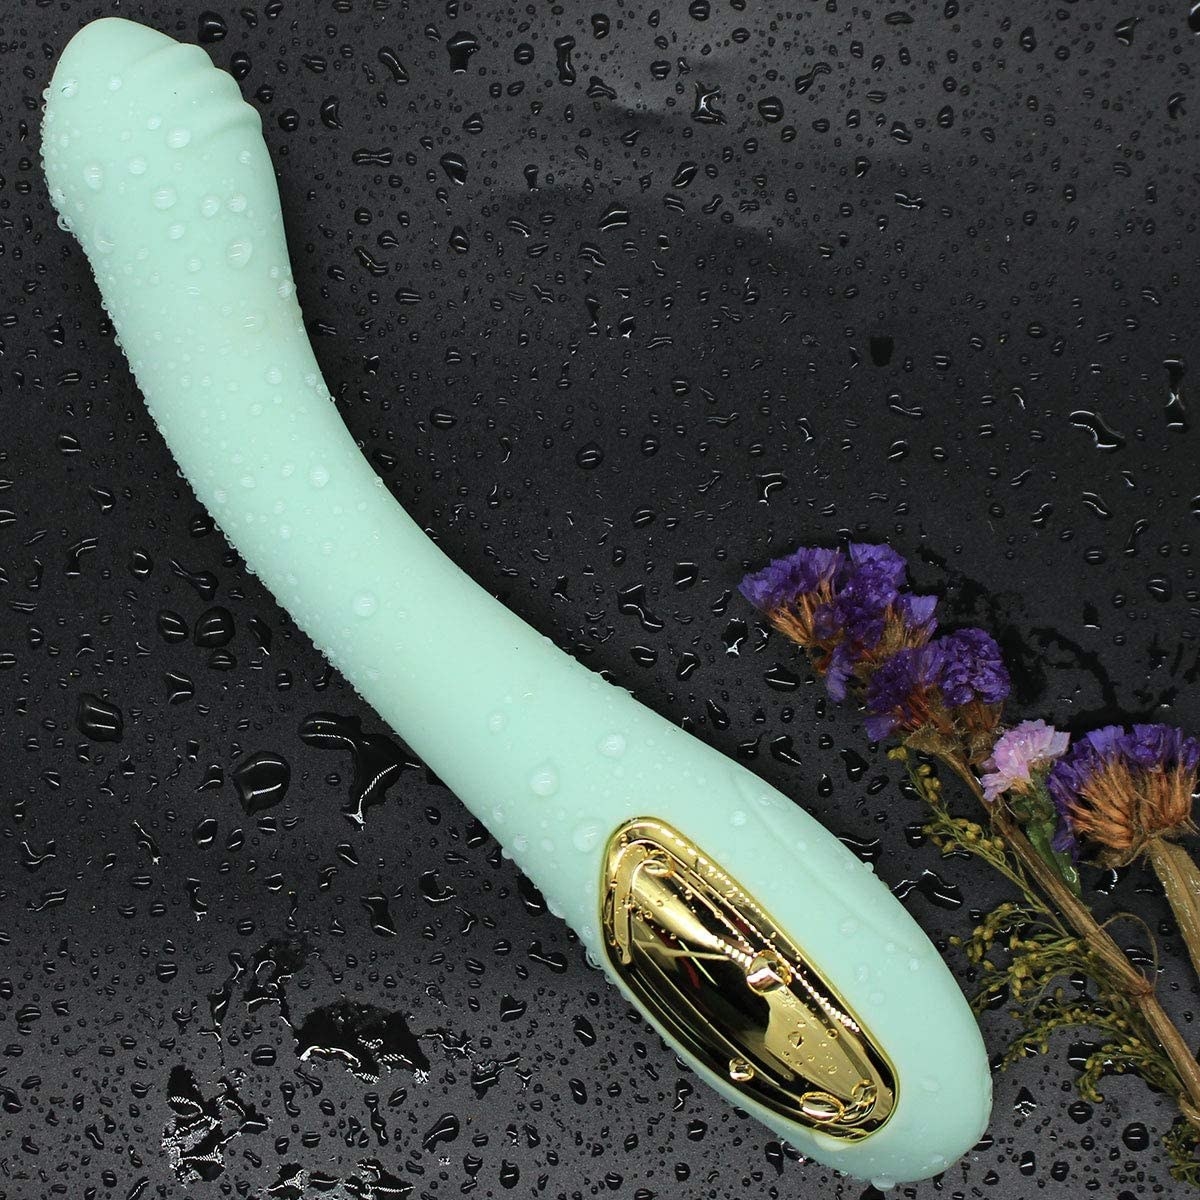 Here Are 17 Intensely Powerful Sex Toys That Will Stay Quiet Even If